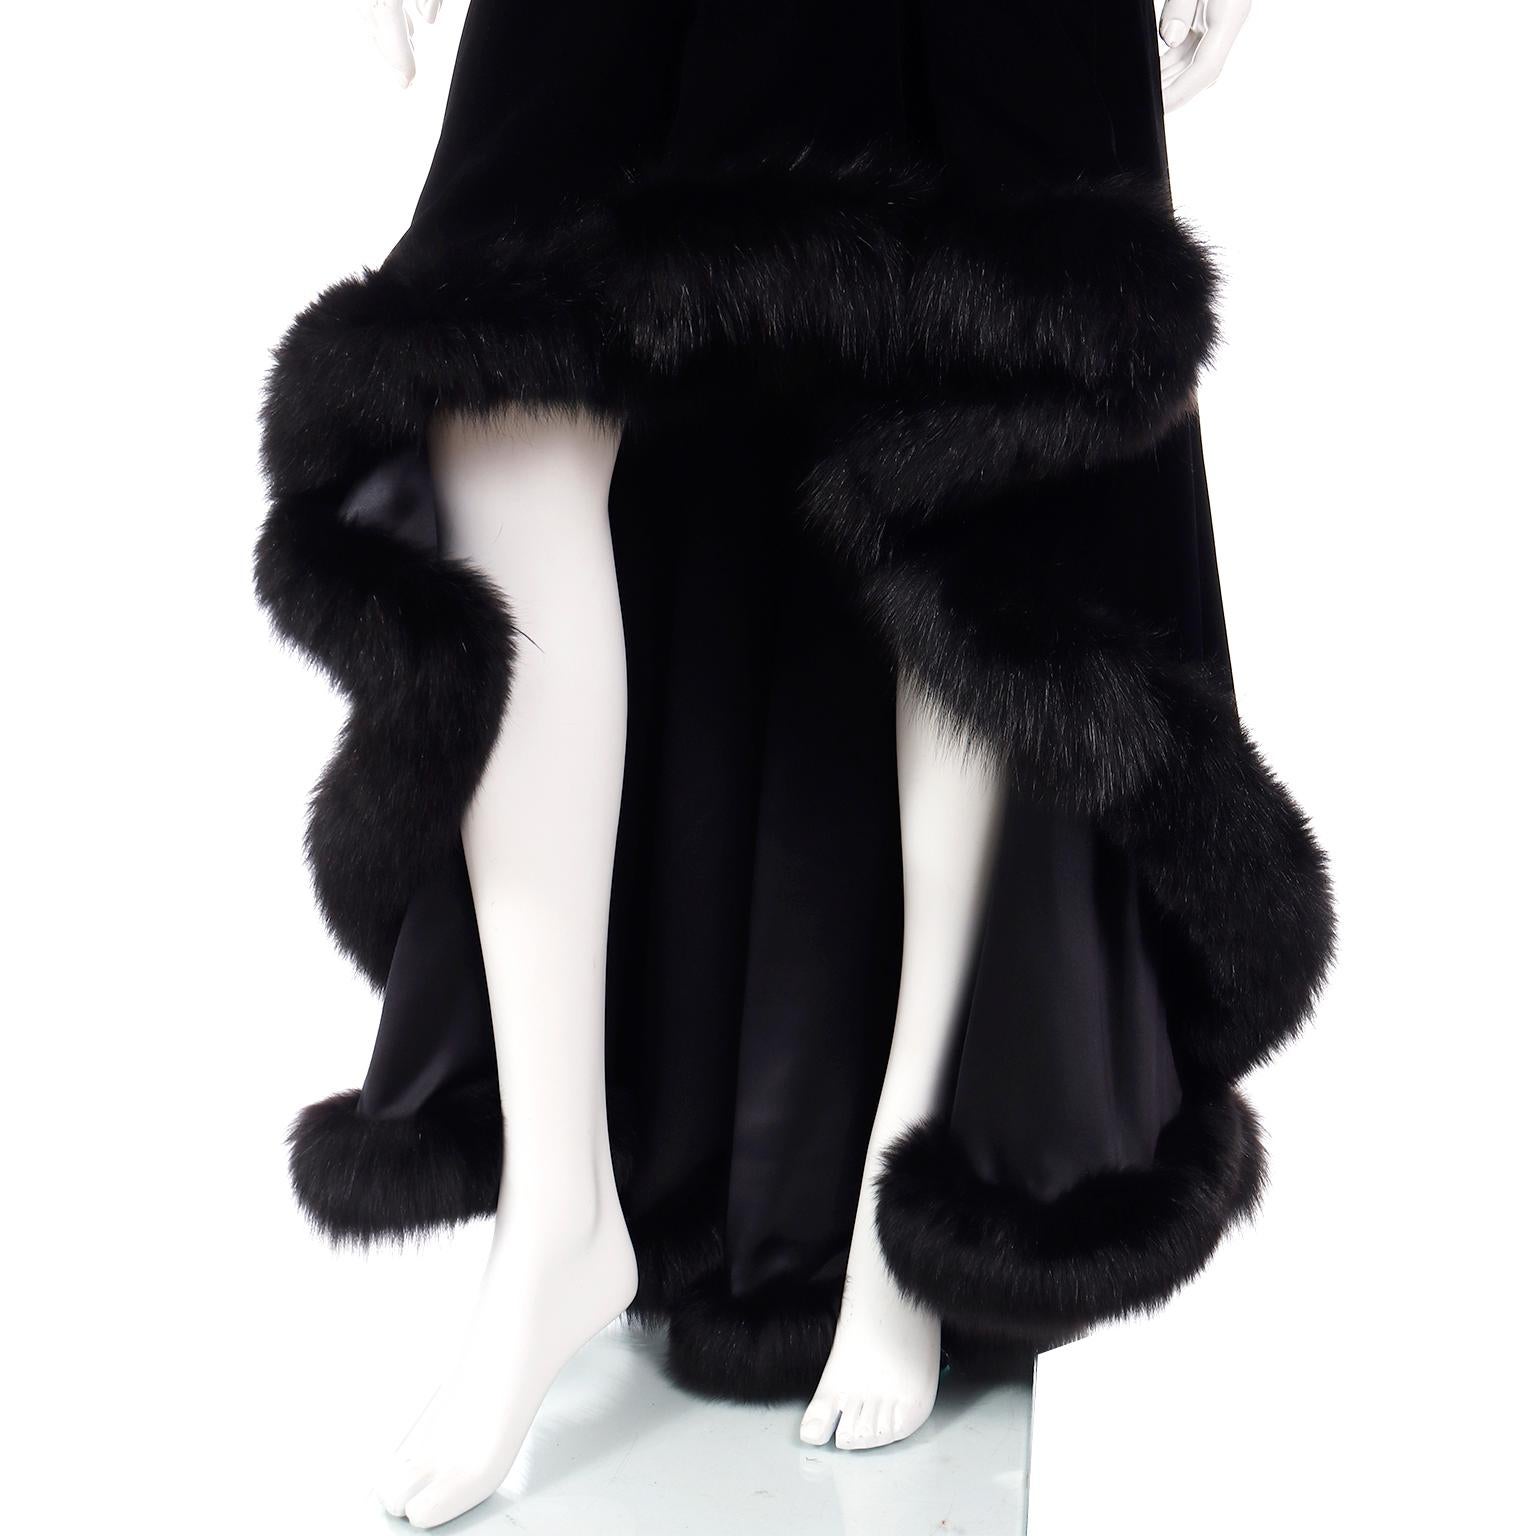 Couture Vintage Black Velvet Strapless Evening Gown With Fur Trim For Sale 5